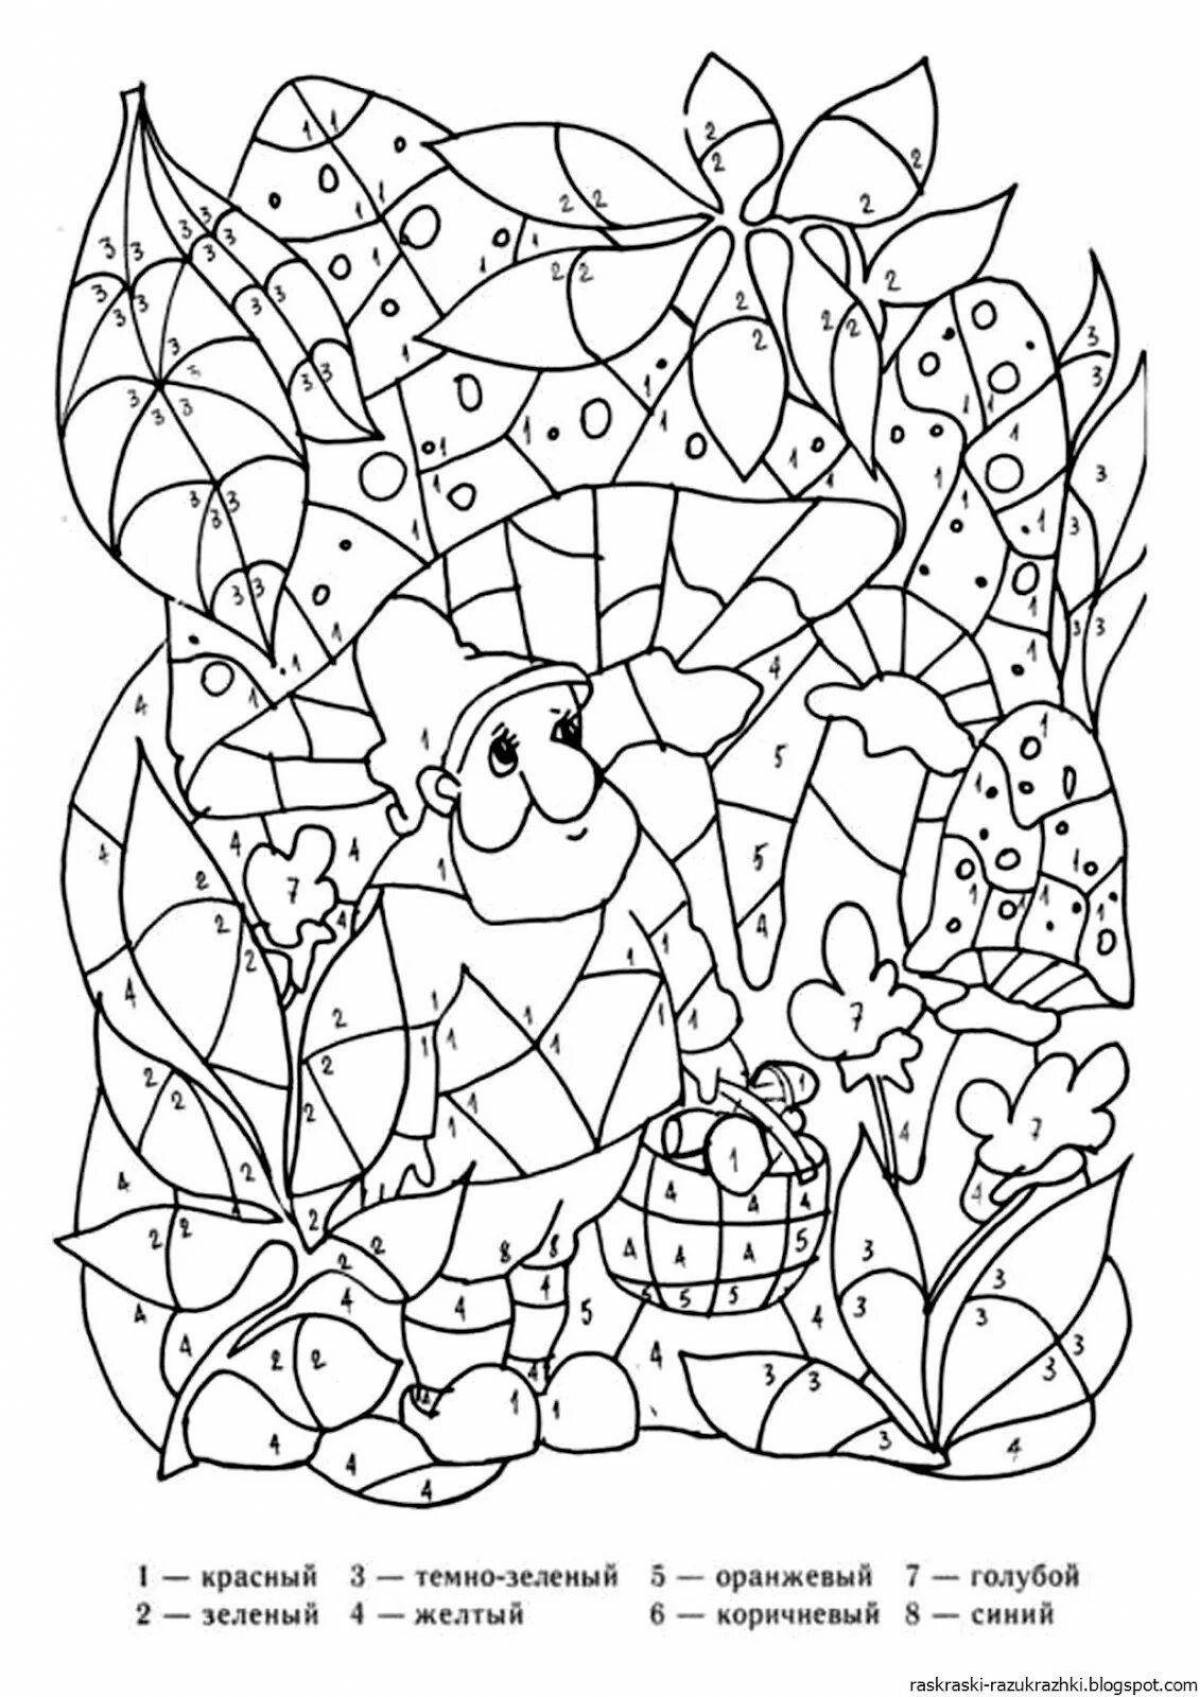 Fairytale coloring by numbers for girls 8 years old